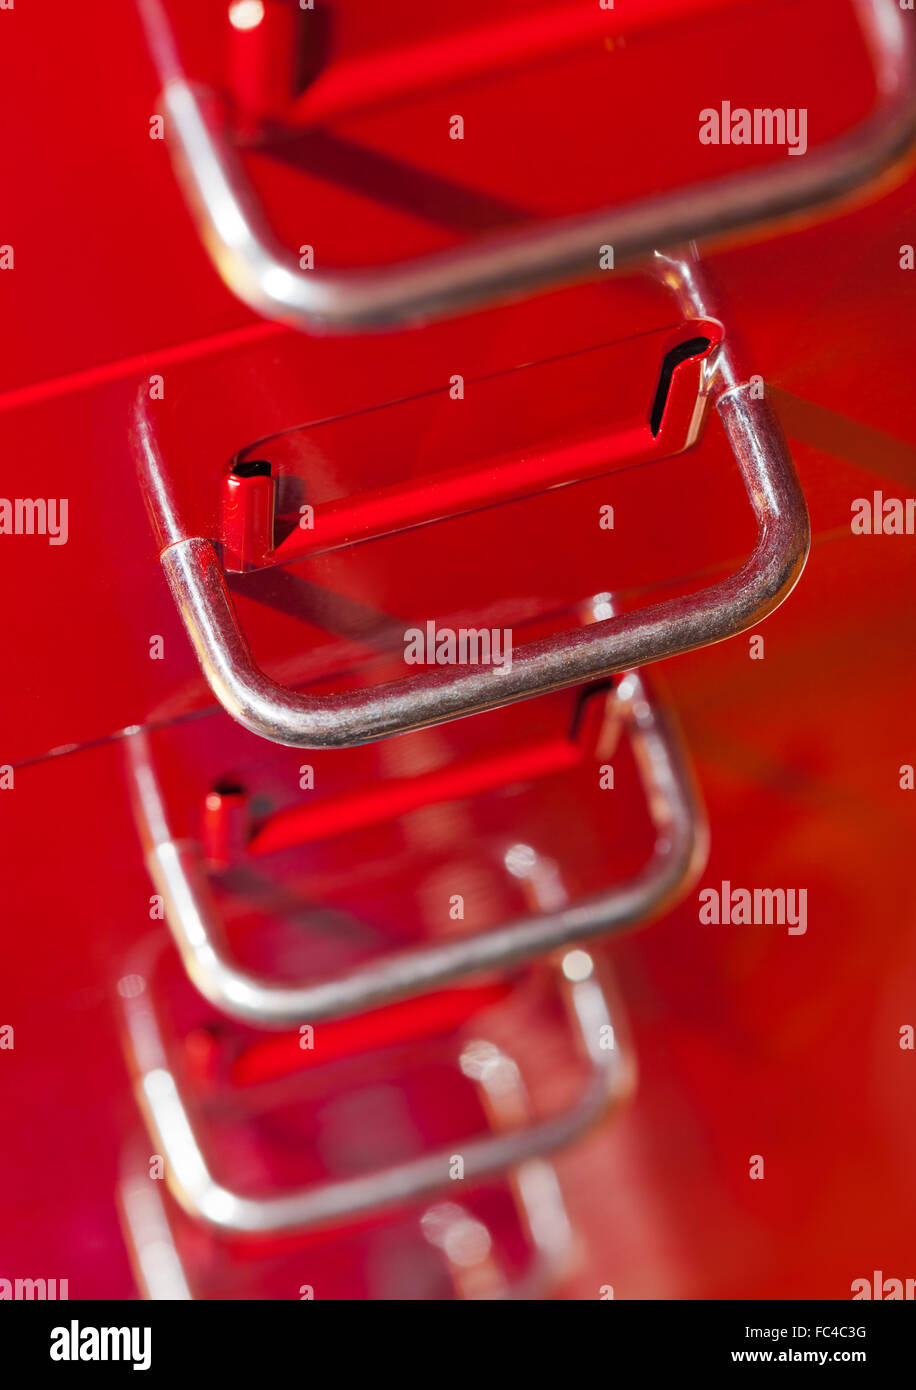 Red File Cabinet With Drawers Stock Photo 93525028 Alamy